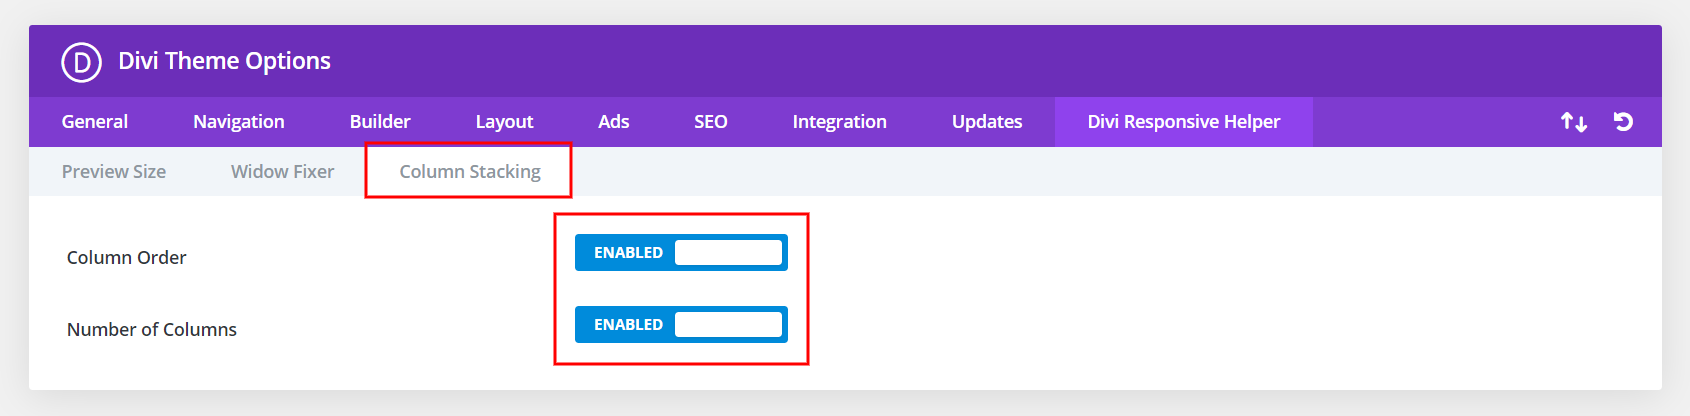 Enable the Divi Responsive Helper Column Stacking Settings In Theme Options